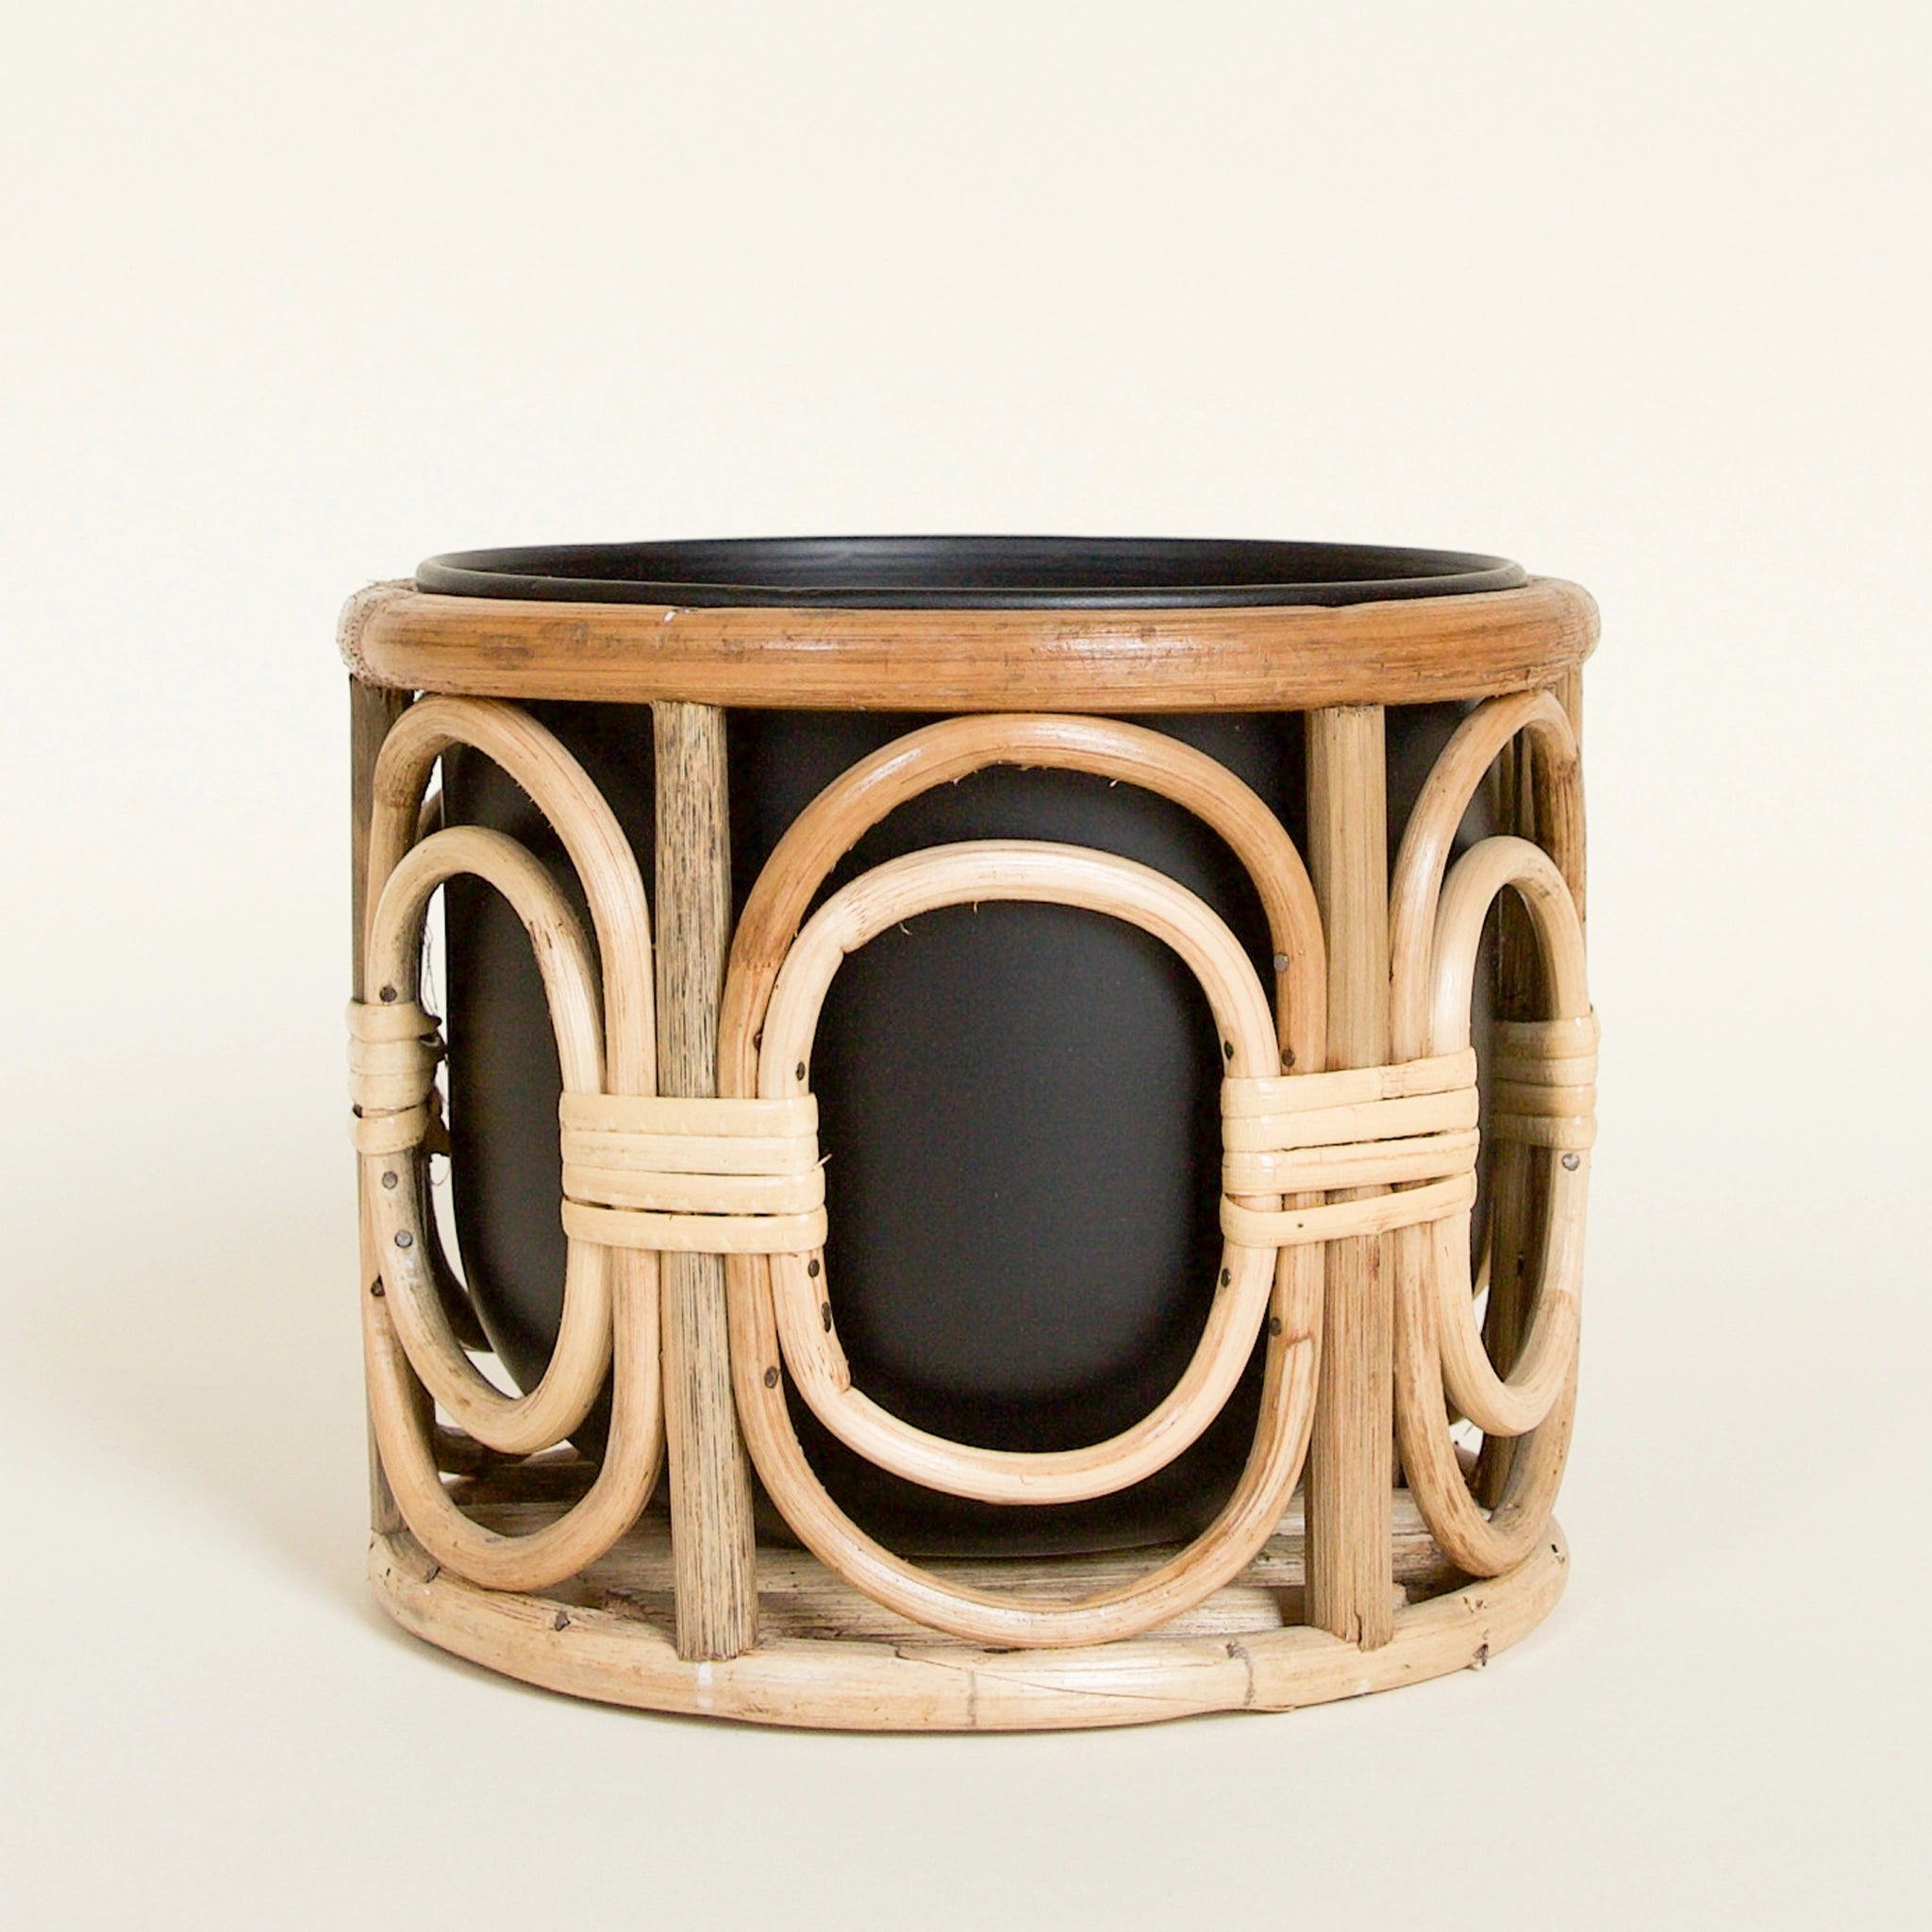 A table top rattan plant stand with black metal insert pot on a white background. Stand features bent wood layered open ovals that wrap around the pot and are separated by vertical lines of wood.